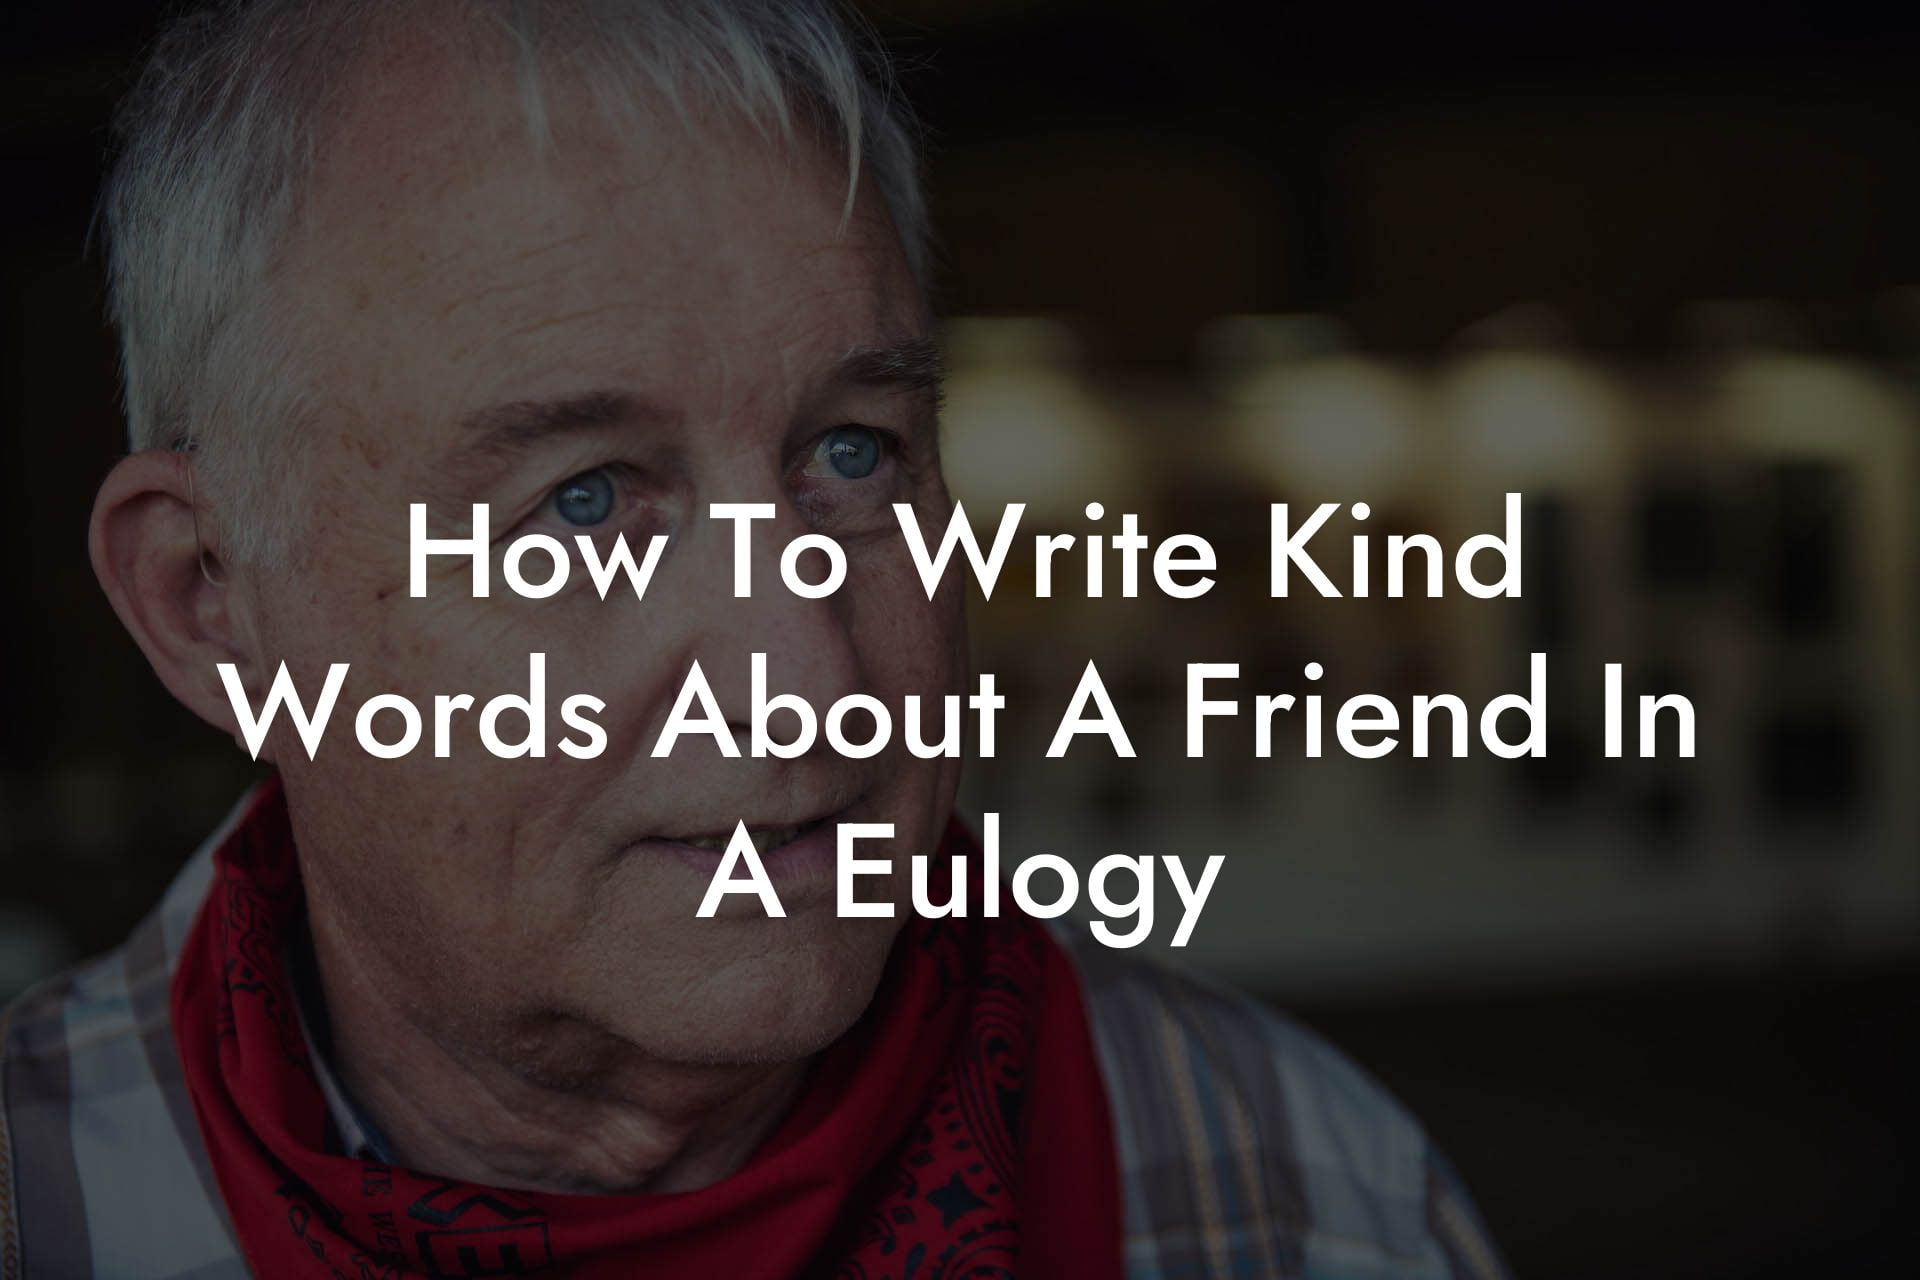 How To Write Kind Words About A Friend In A Eulogy